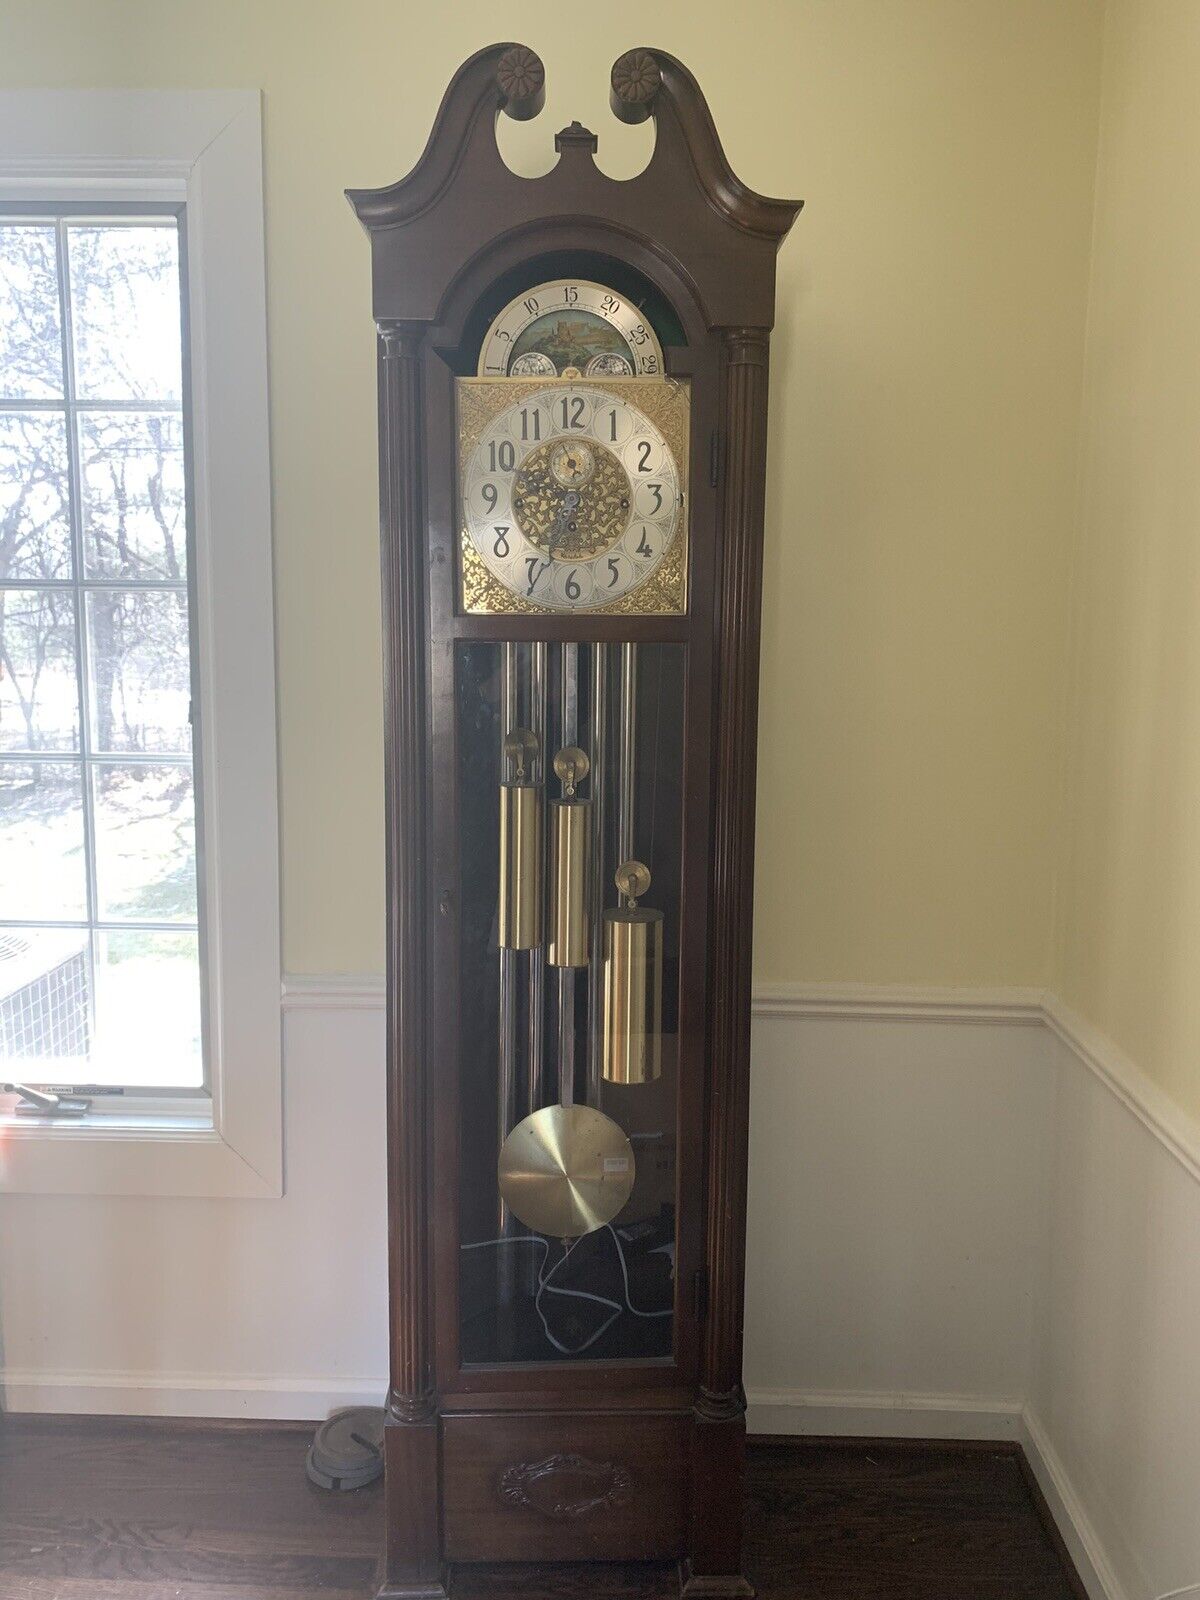 Herschede Five (5) Tube Whittier Grandfather Clock #217 in Mahogany Case